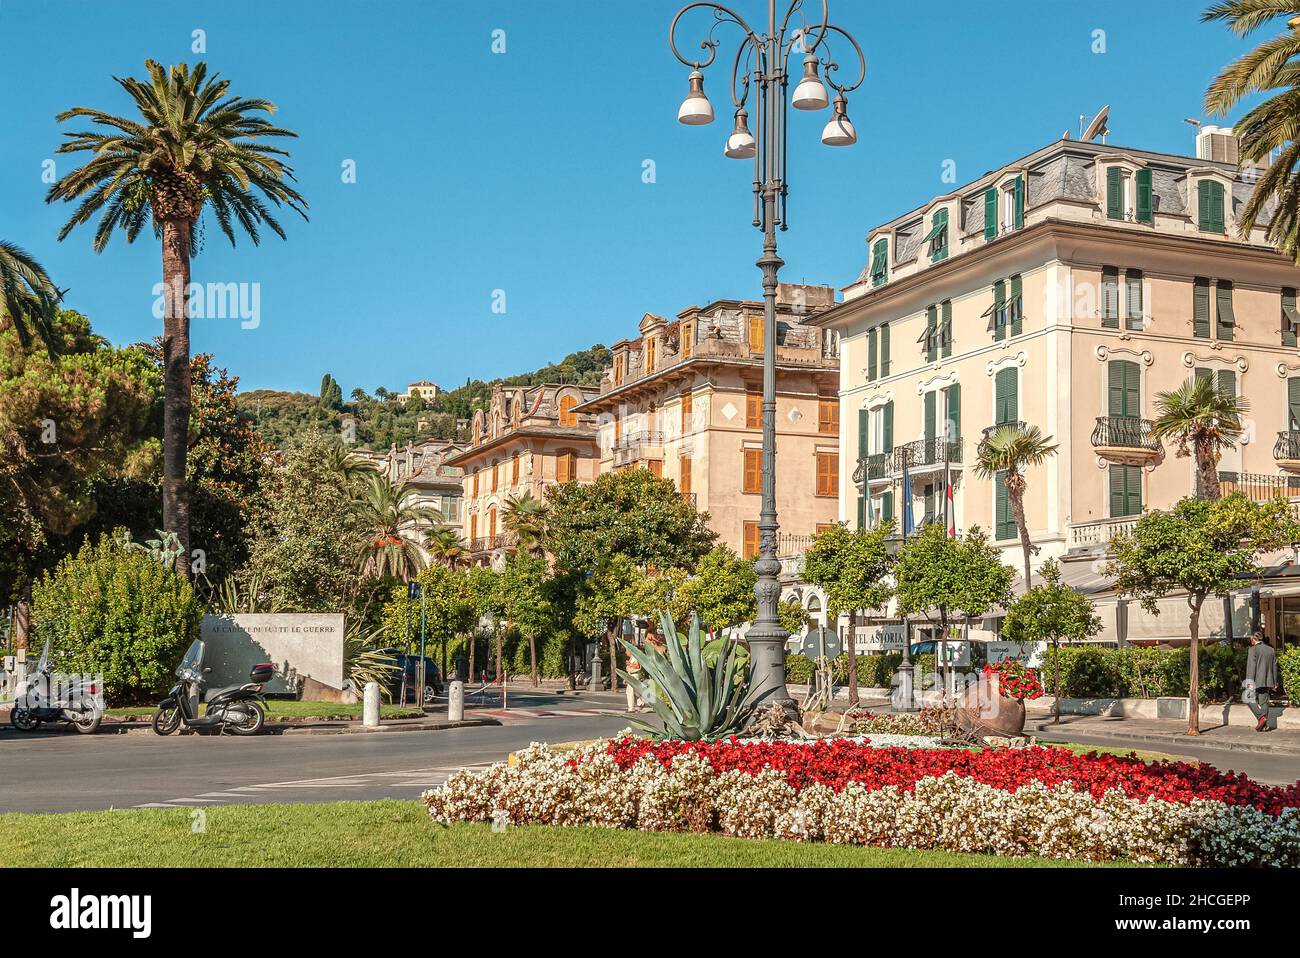 Flower display at the Piazza IV Novembre in Rapallo, Liguria, Italy Stock Photo